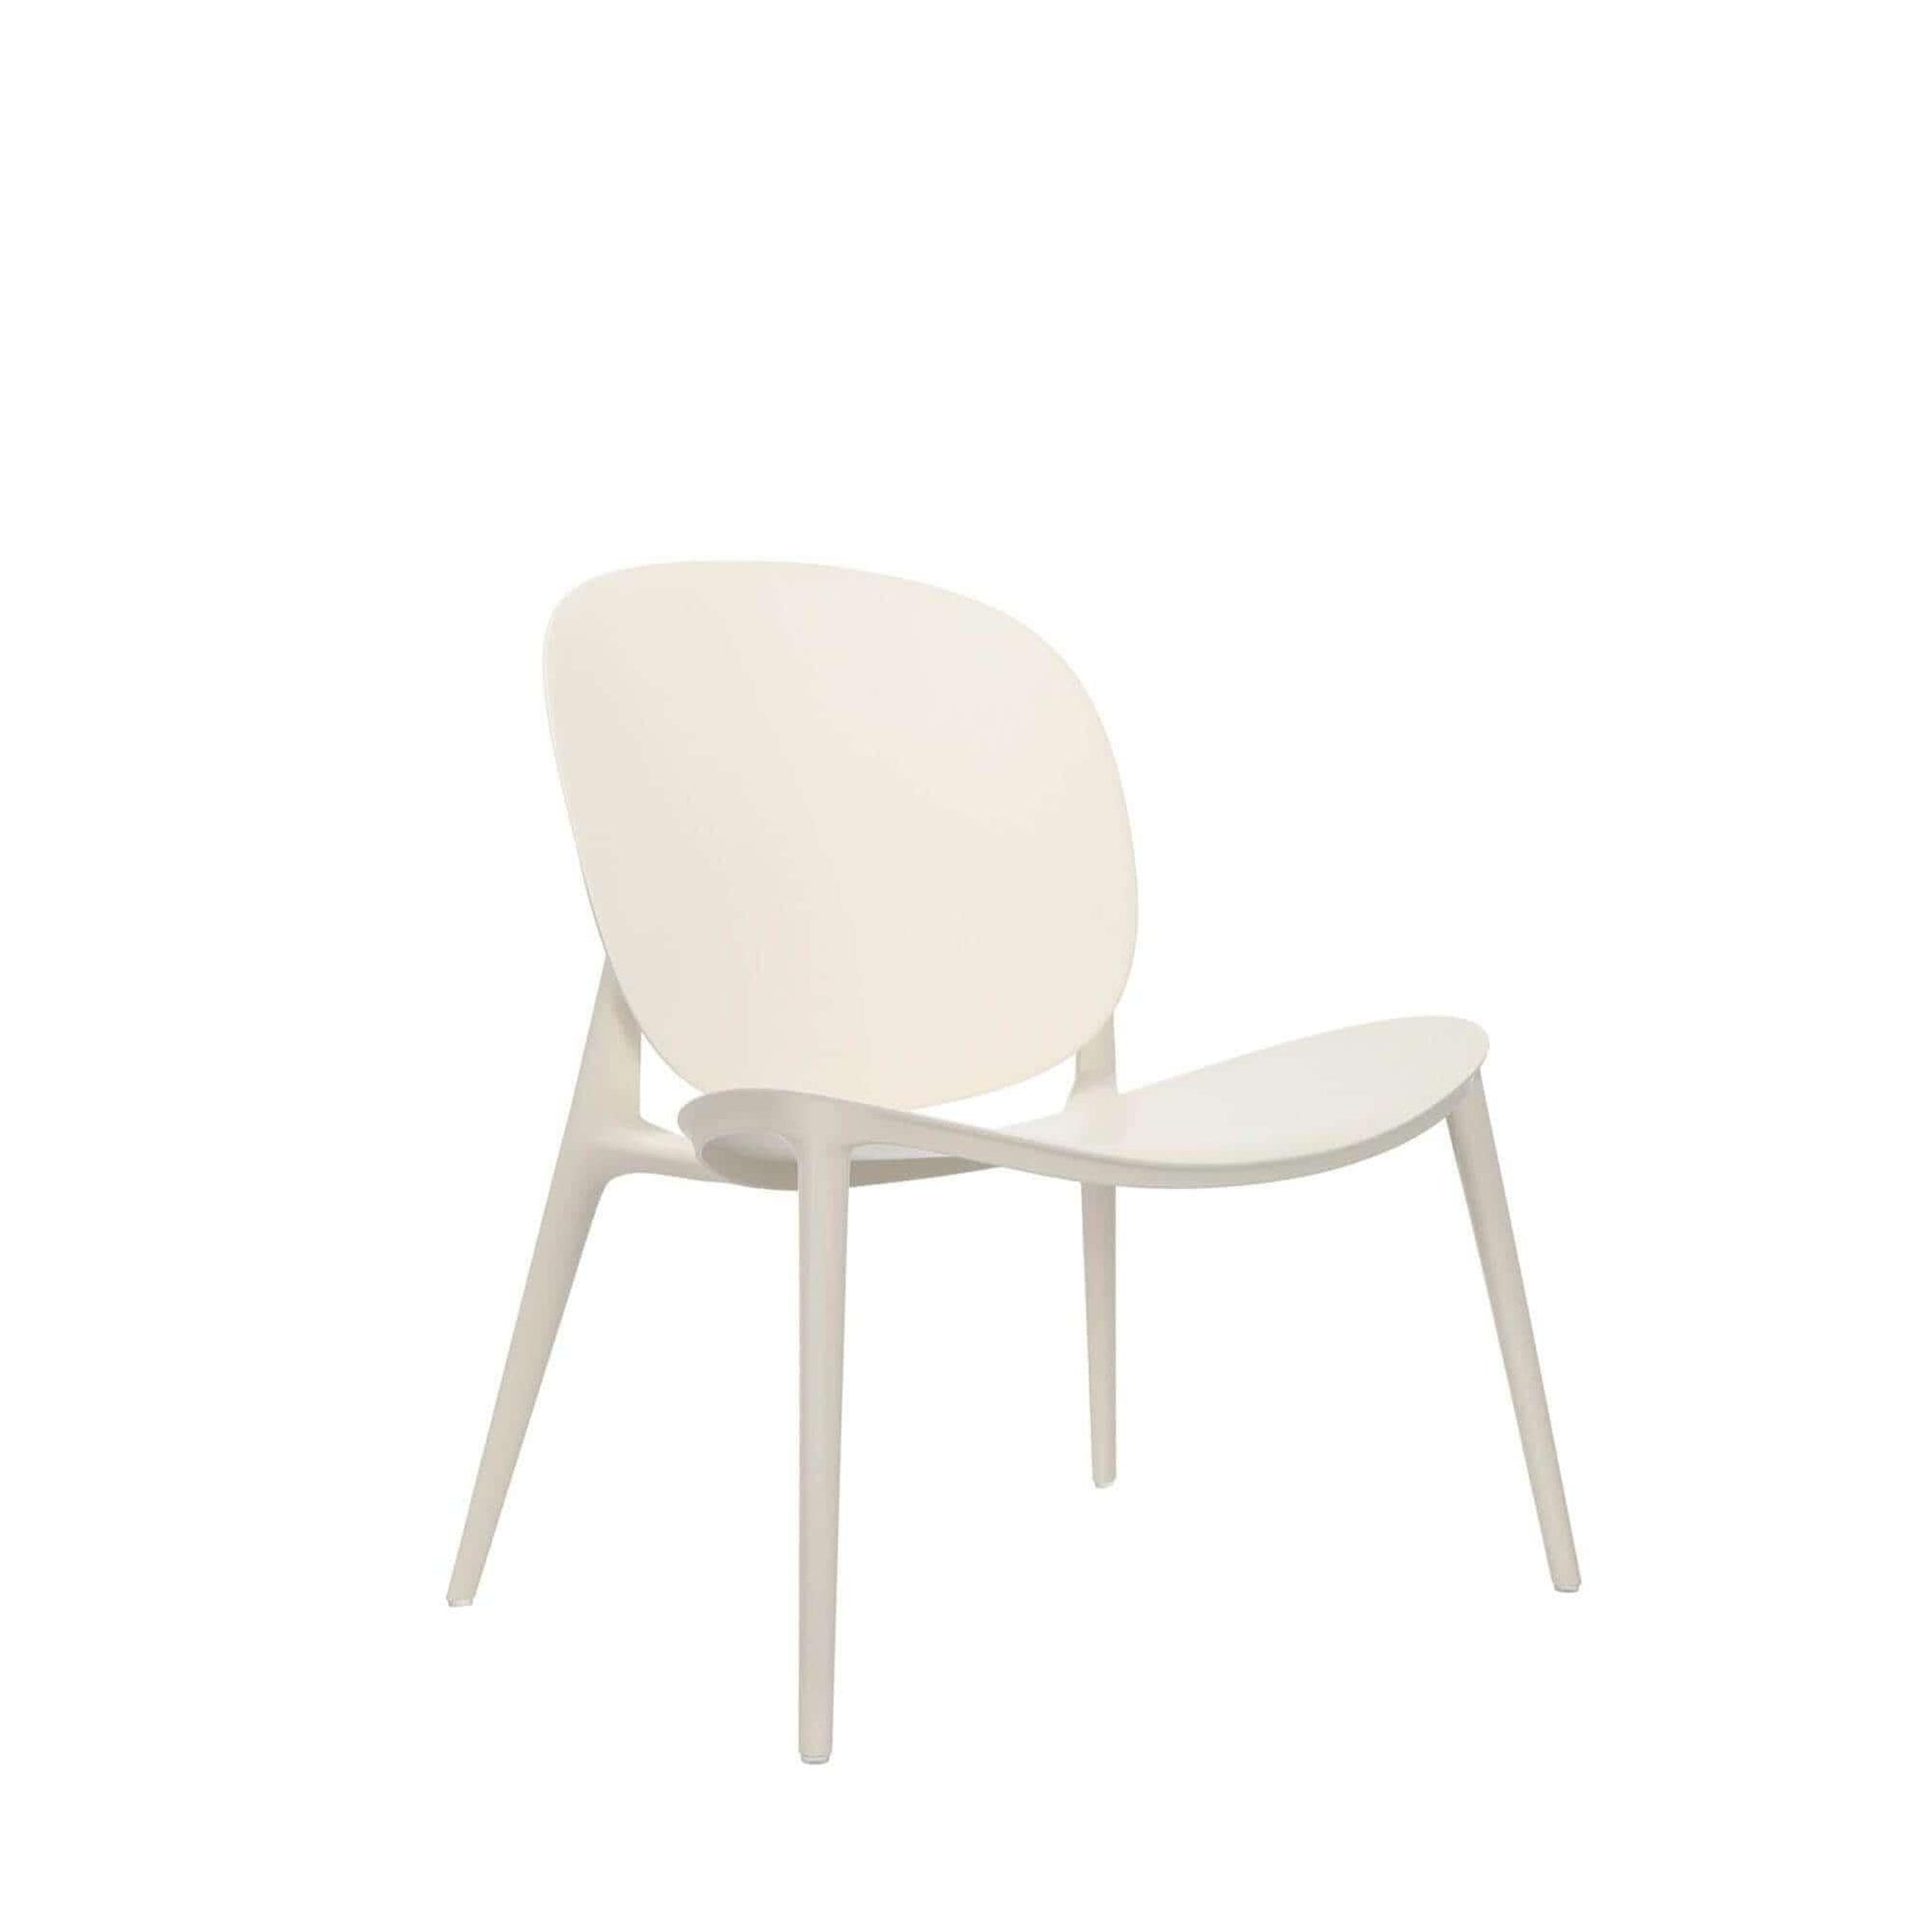 Be Bop Indoor-Outdoor Low Accent Chair - Curated - Furniture - Kartell